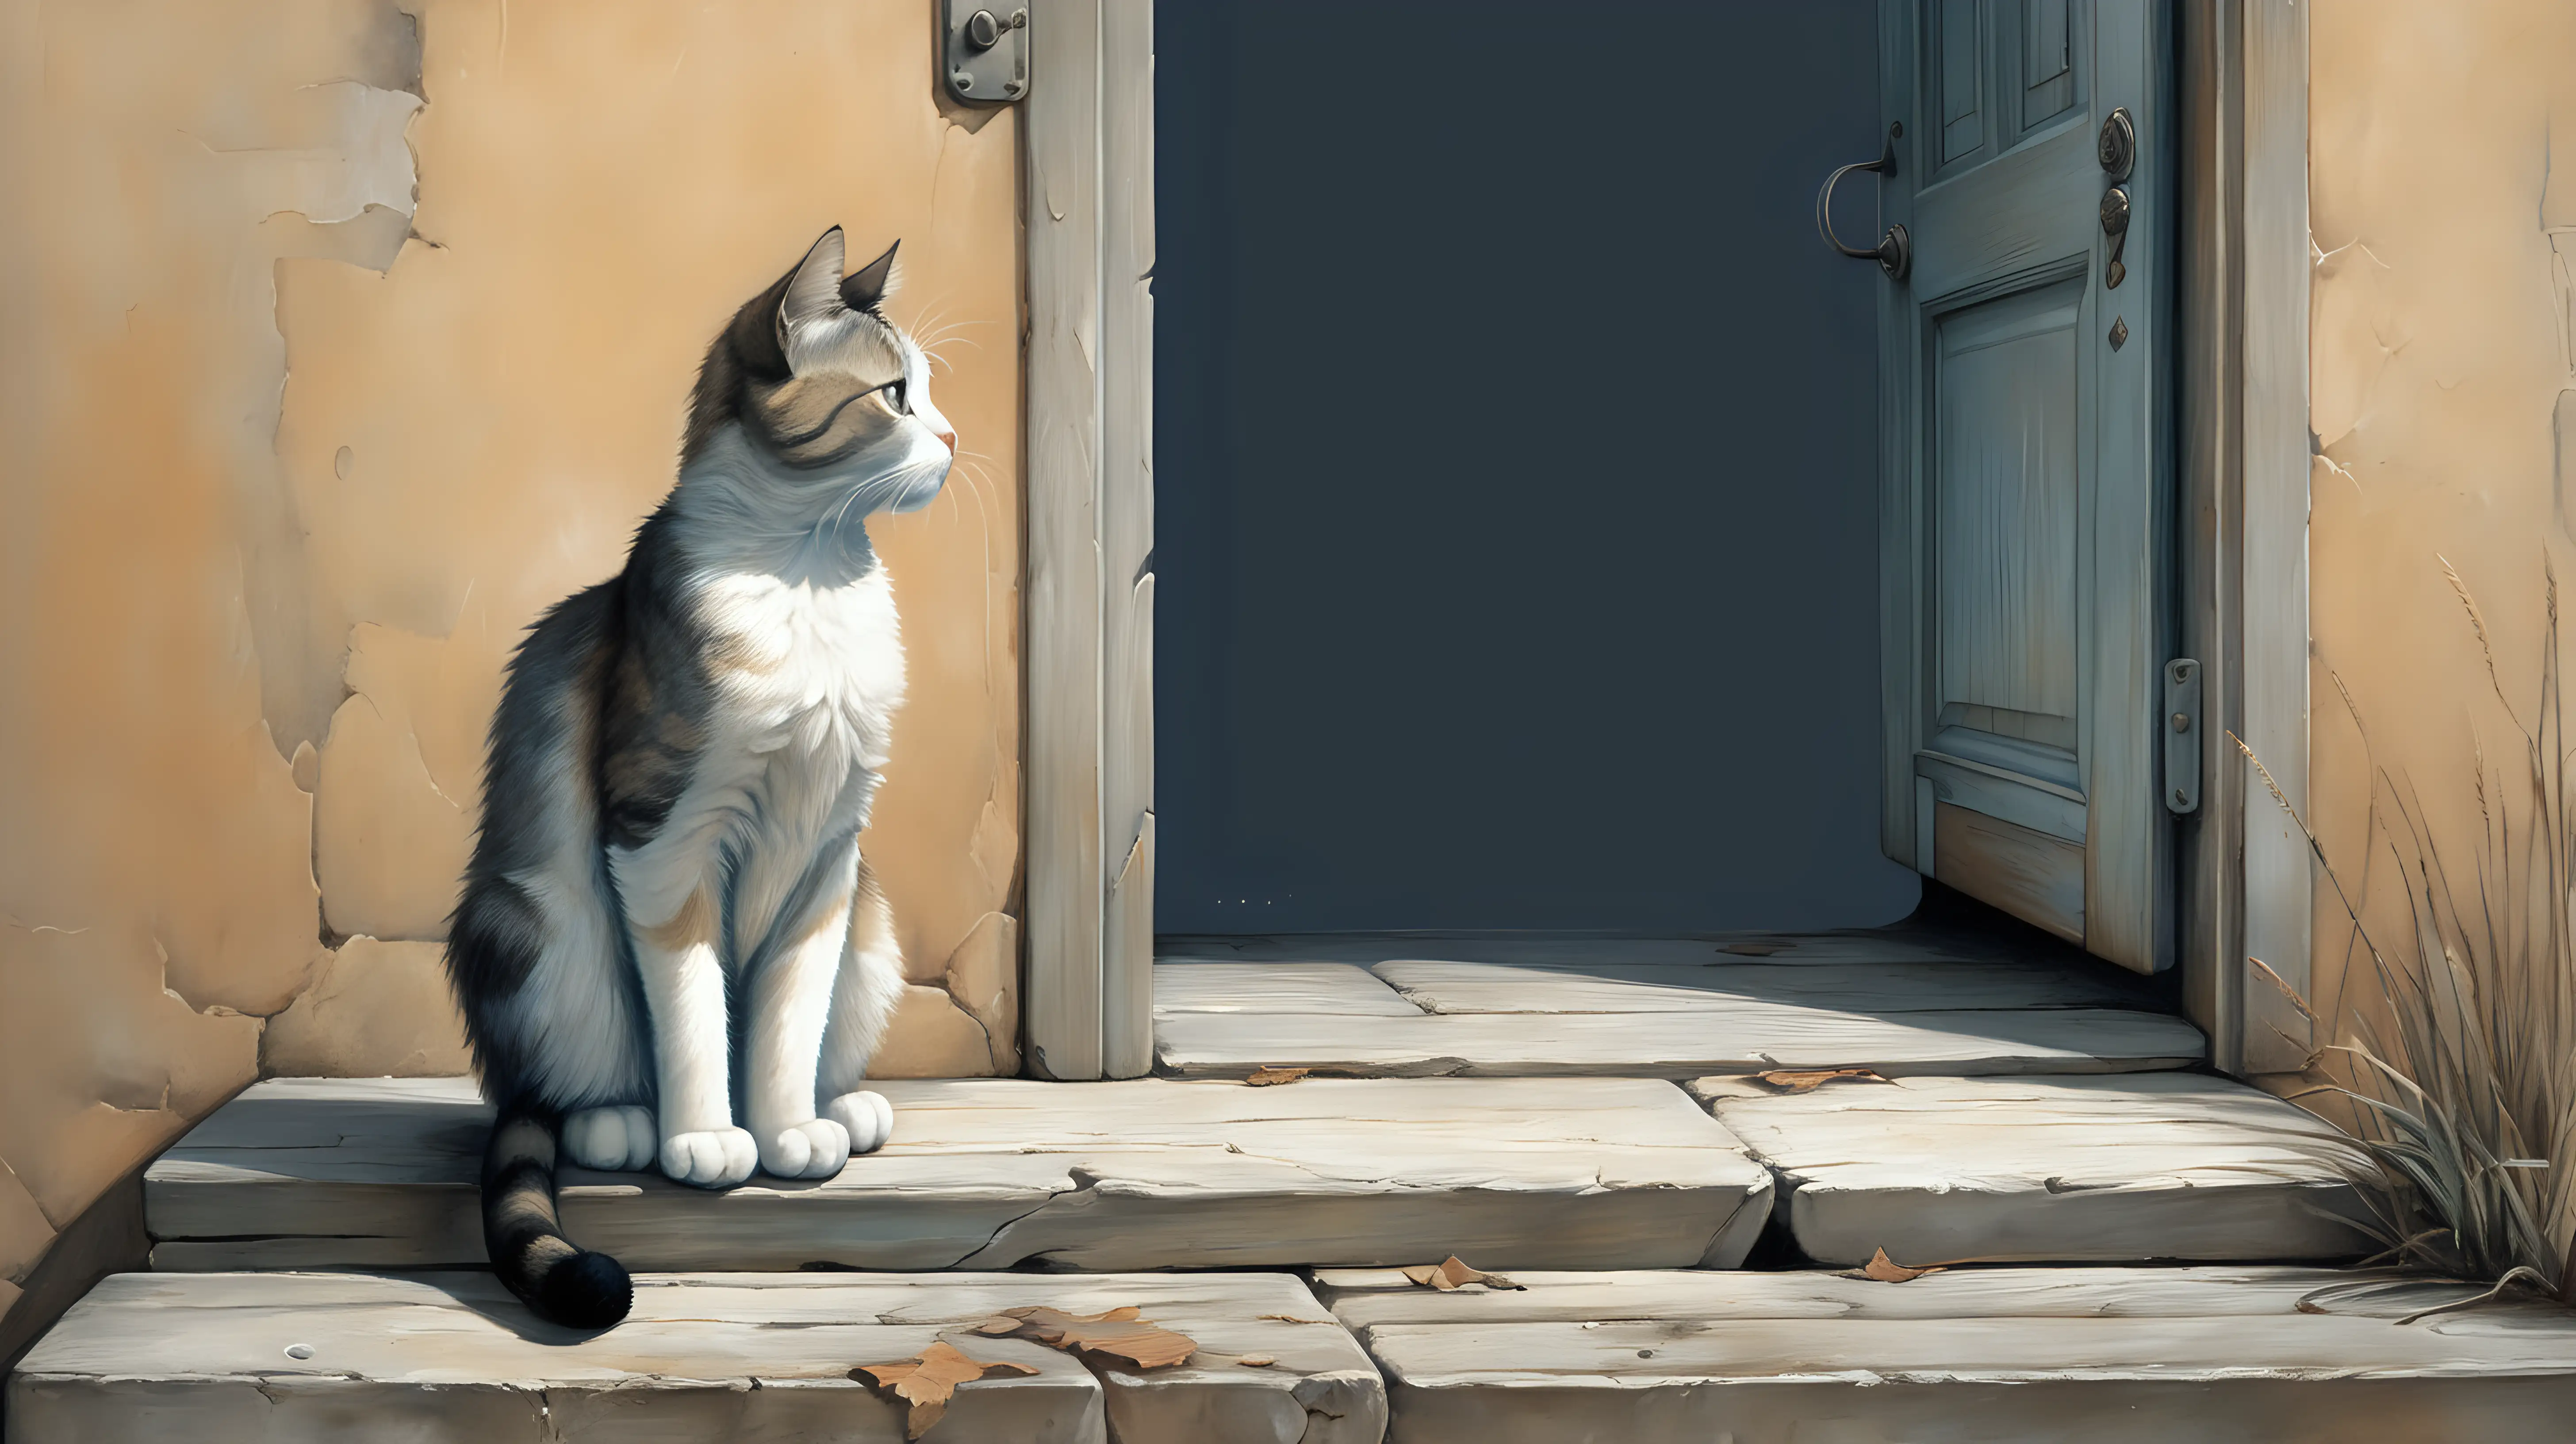 "Illustrate a sad cat sitting on a weathered, forgotten doorstep, looking at a distant horizon, hinting at a sense of longing and nostalgia."